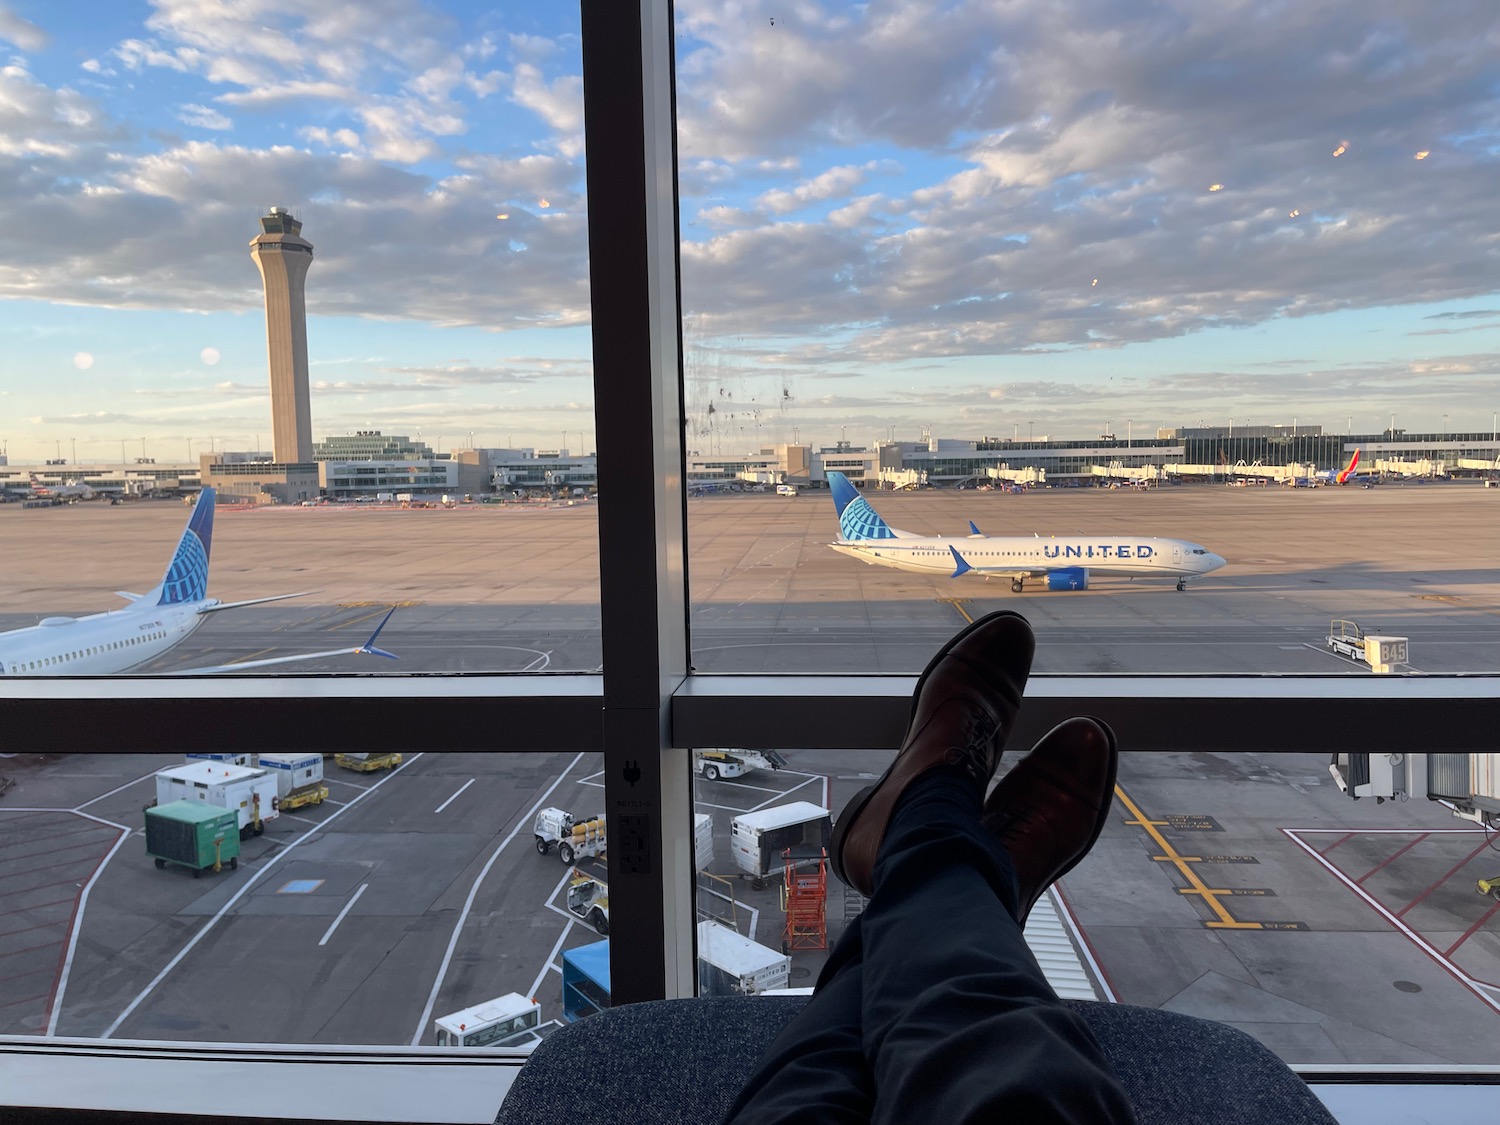 a person's legs in front of a window with airplanes in the background